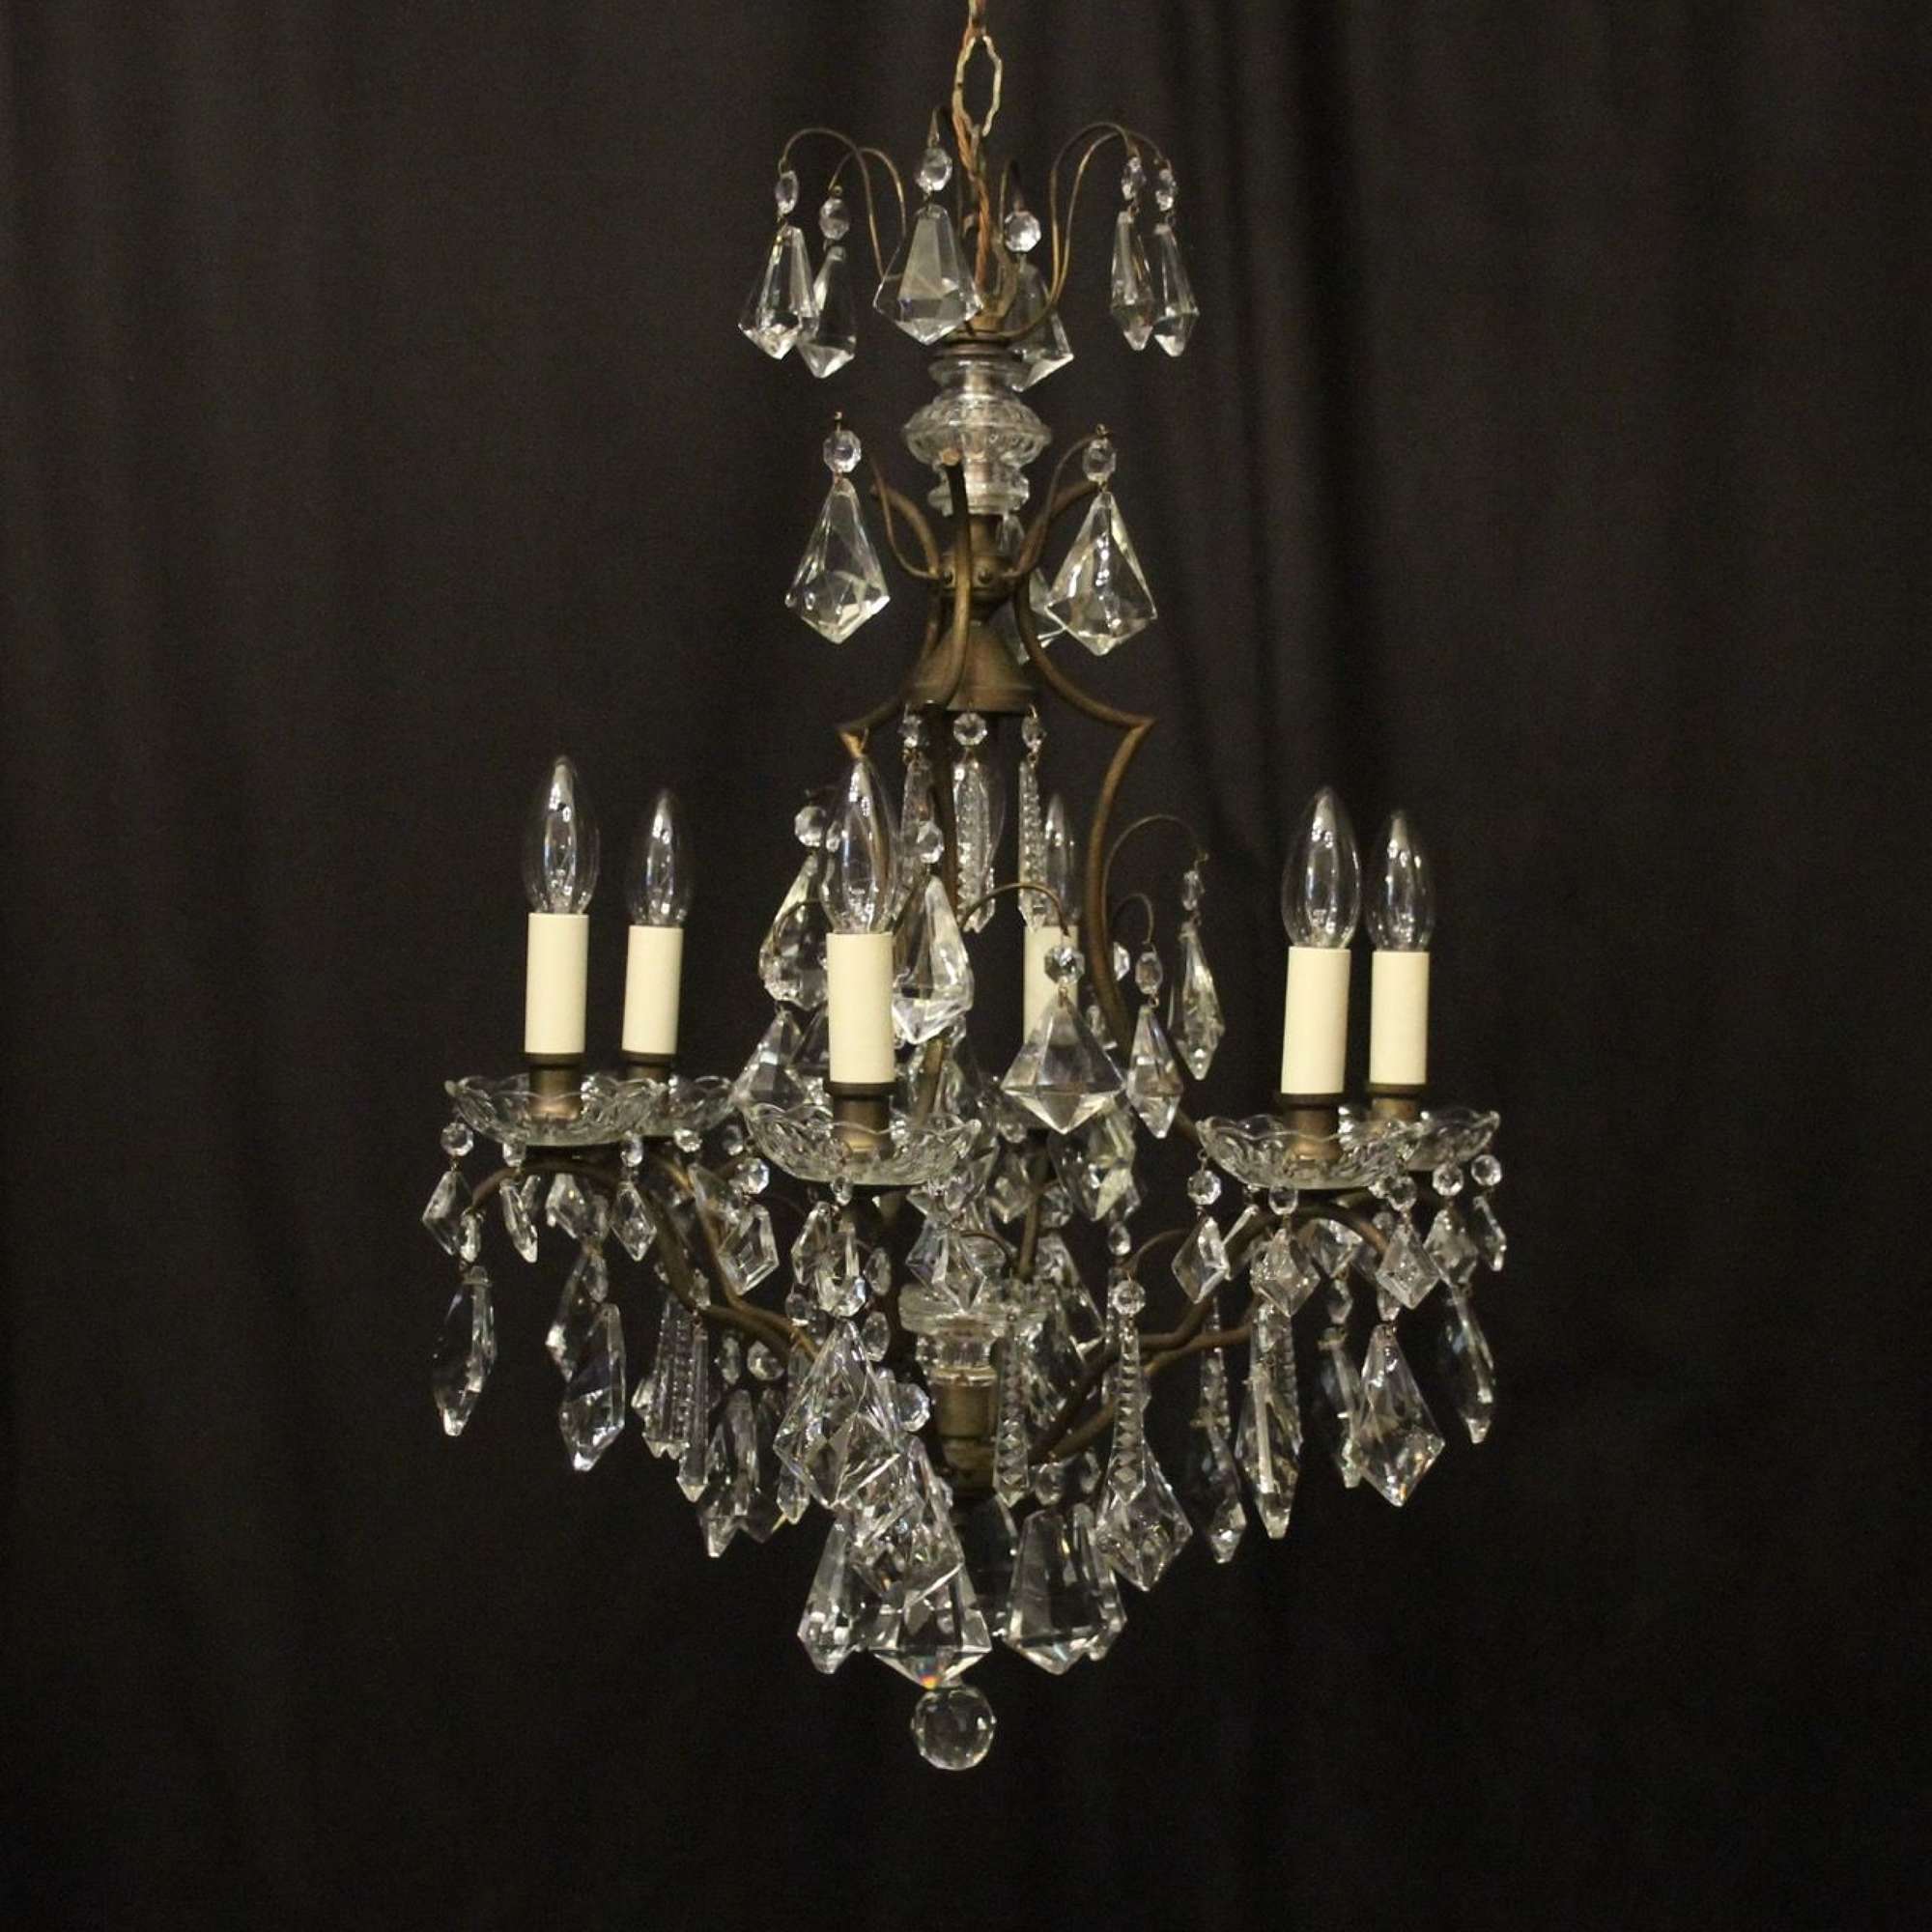 French Gilded 7 Light Antique Chandelier